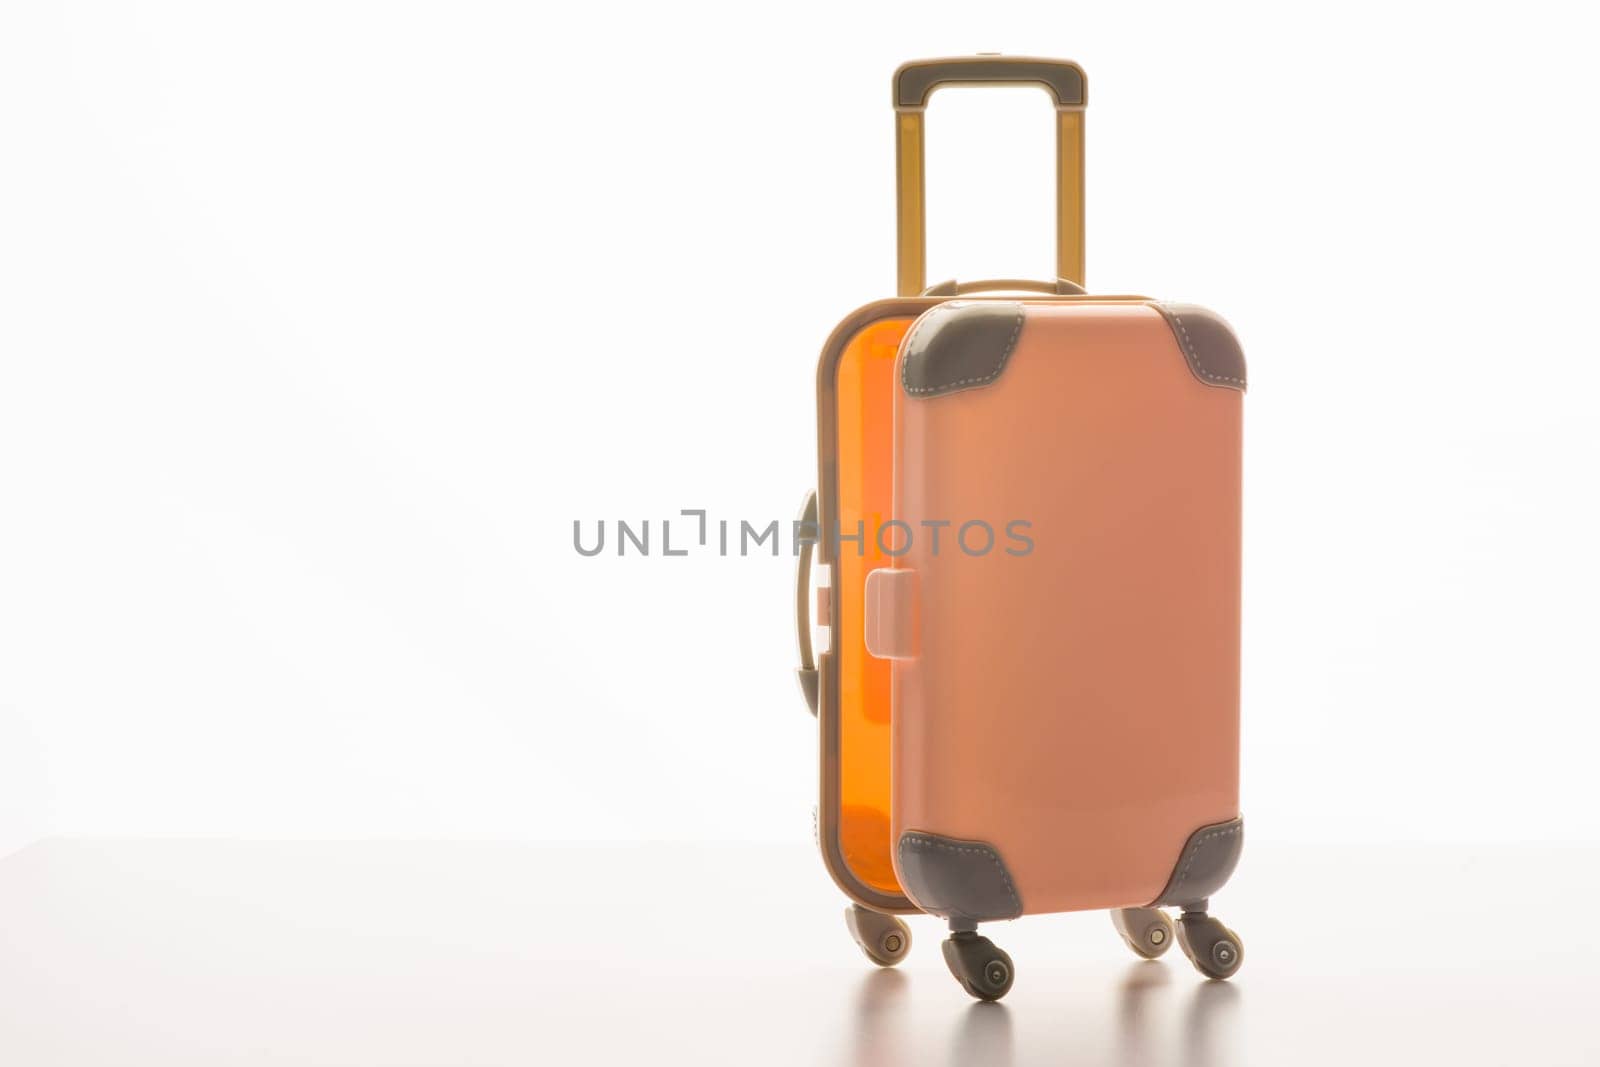 Luggage concept with case on the white background